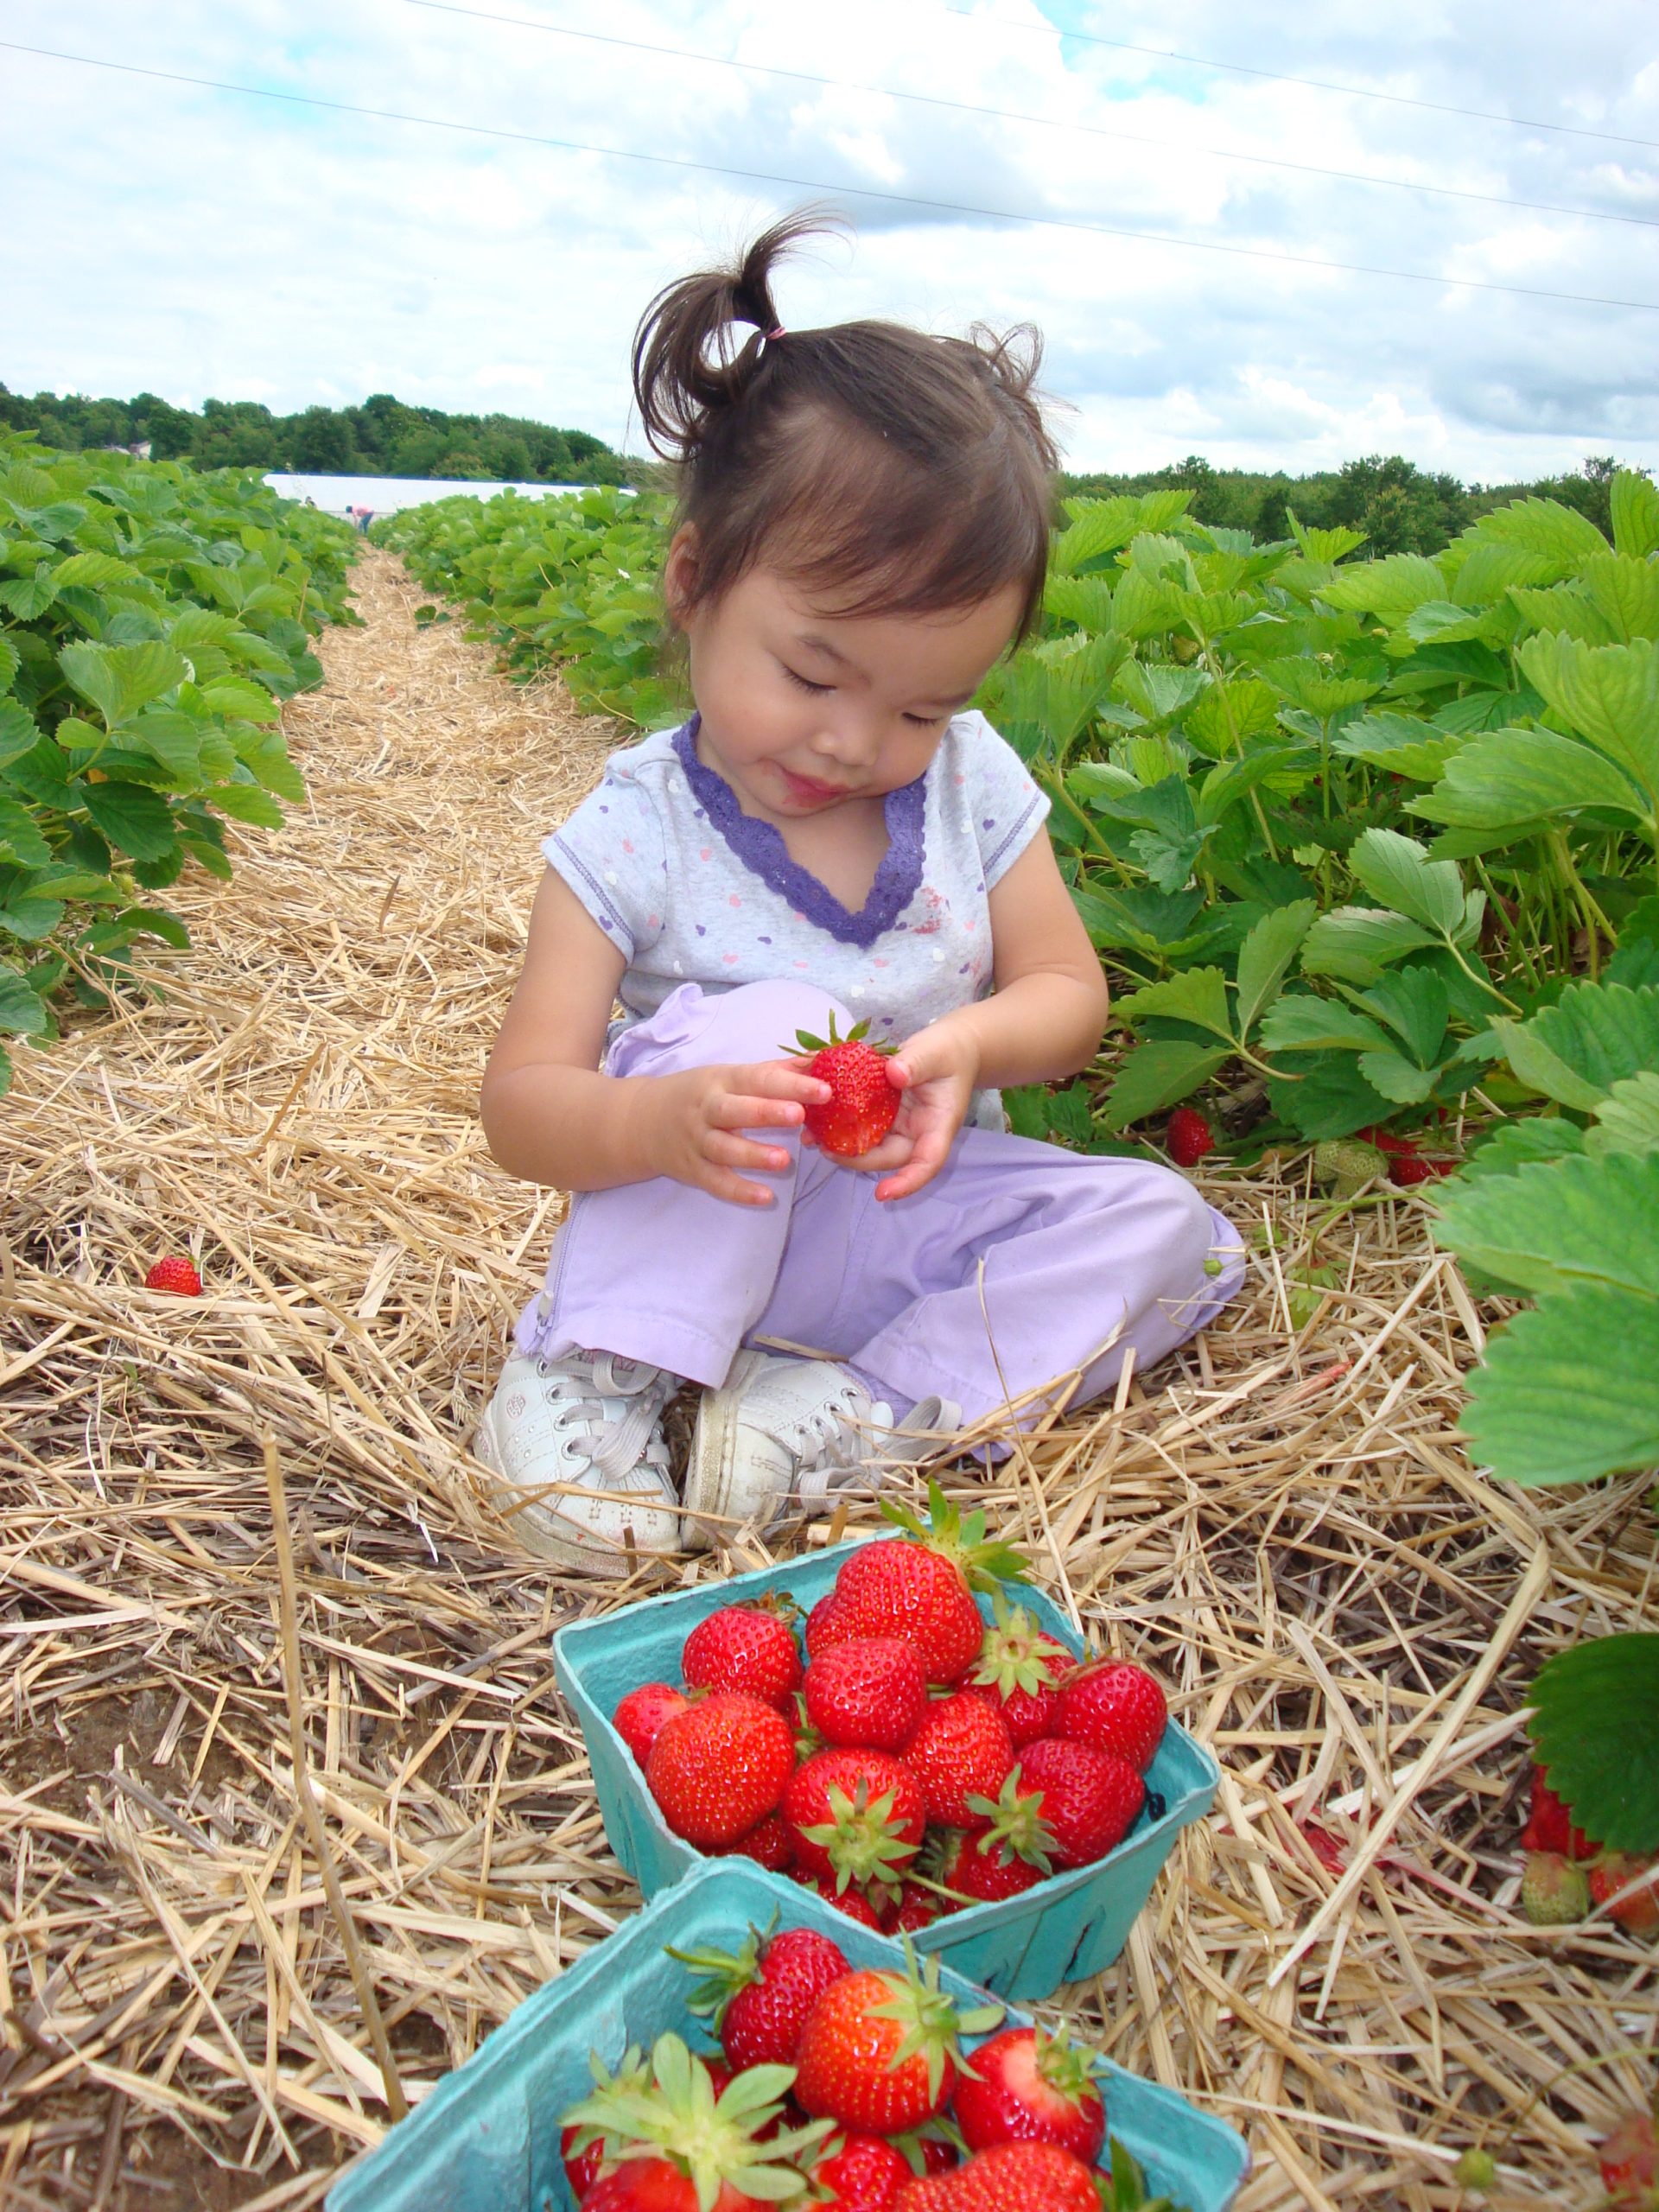 Strawberry Picking (user submitted)